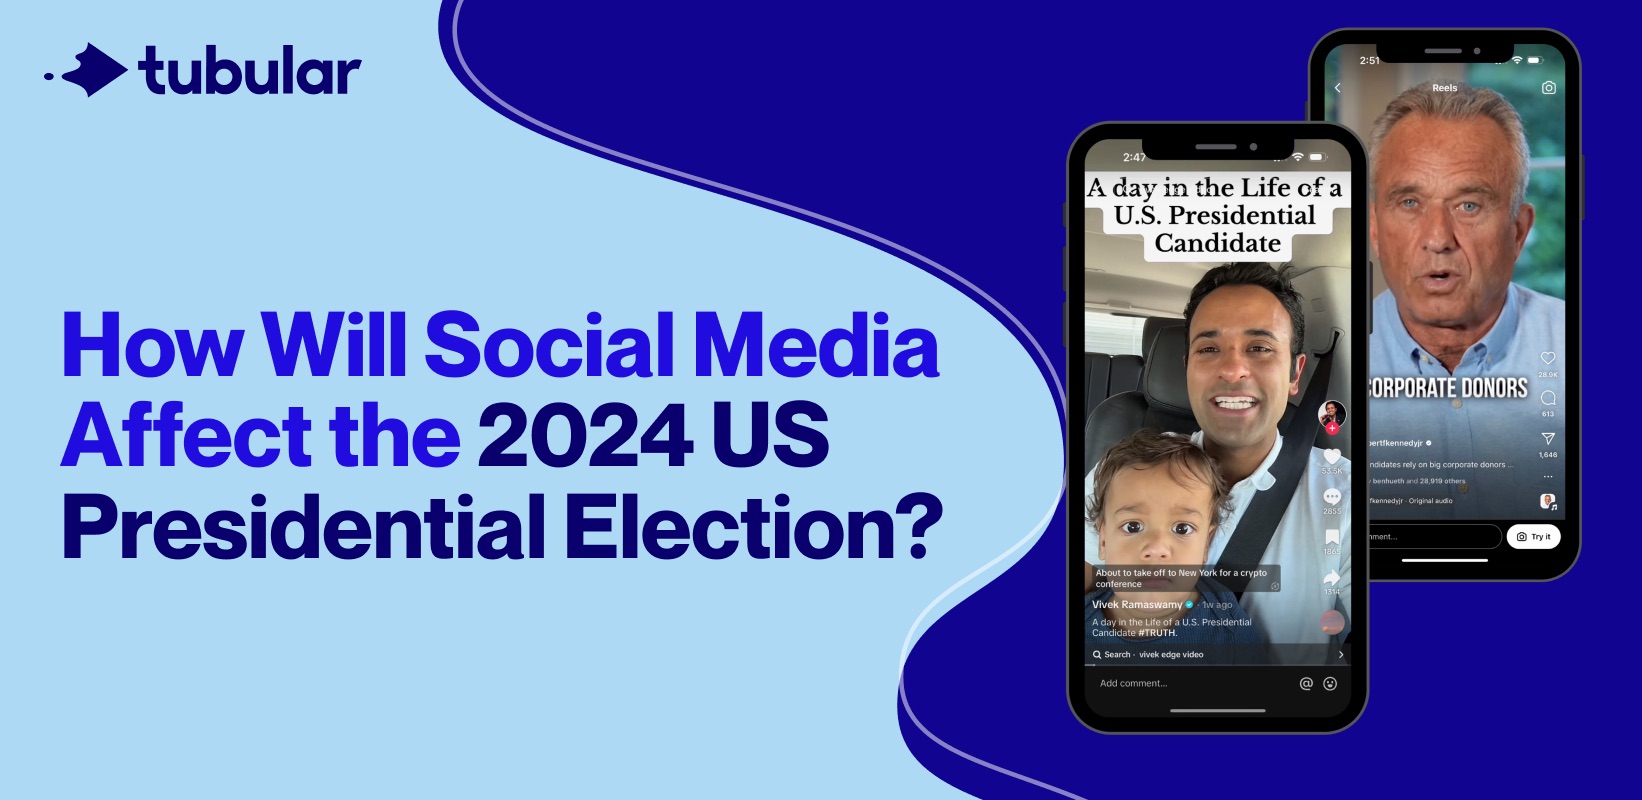 How Will Social Media Affect the 2024 US Presidential Election?